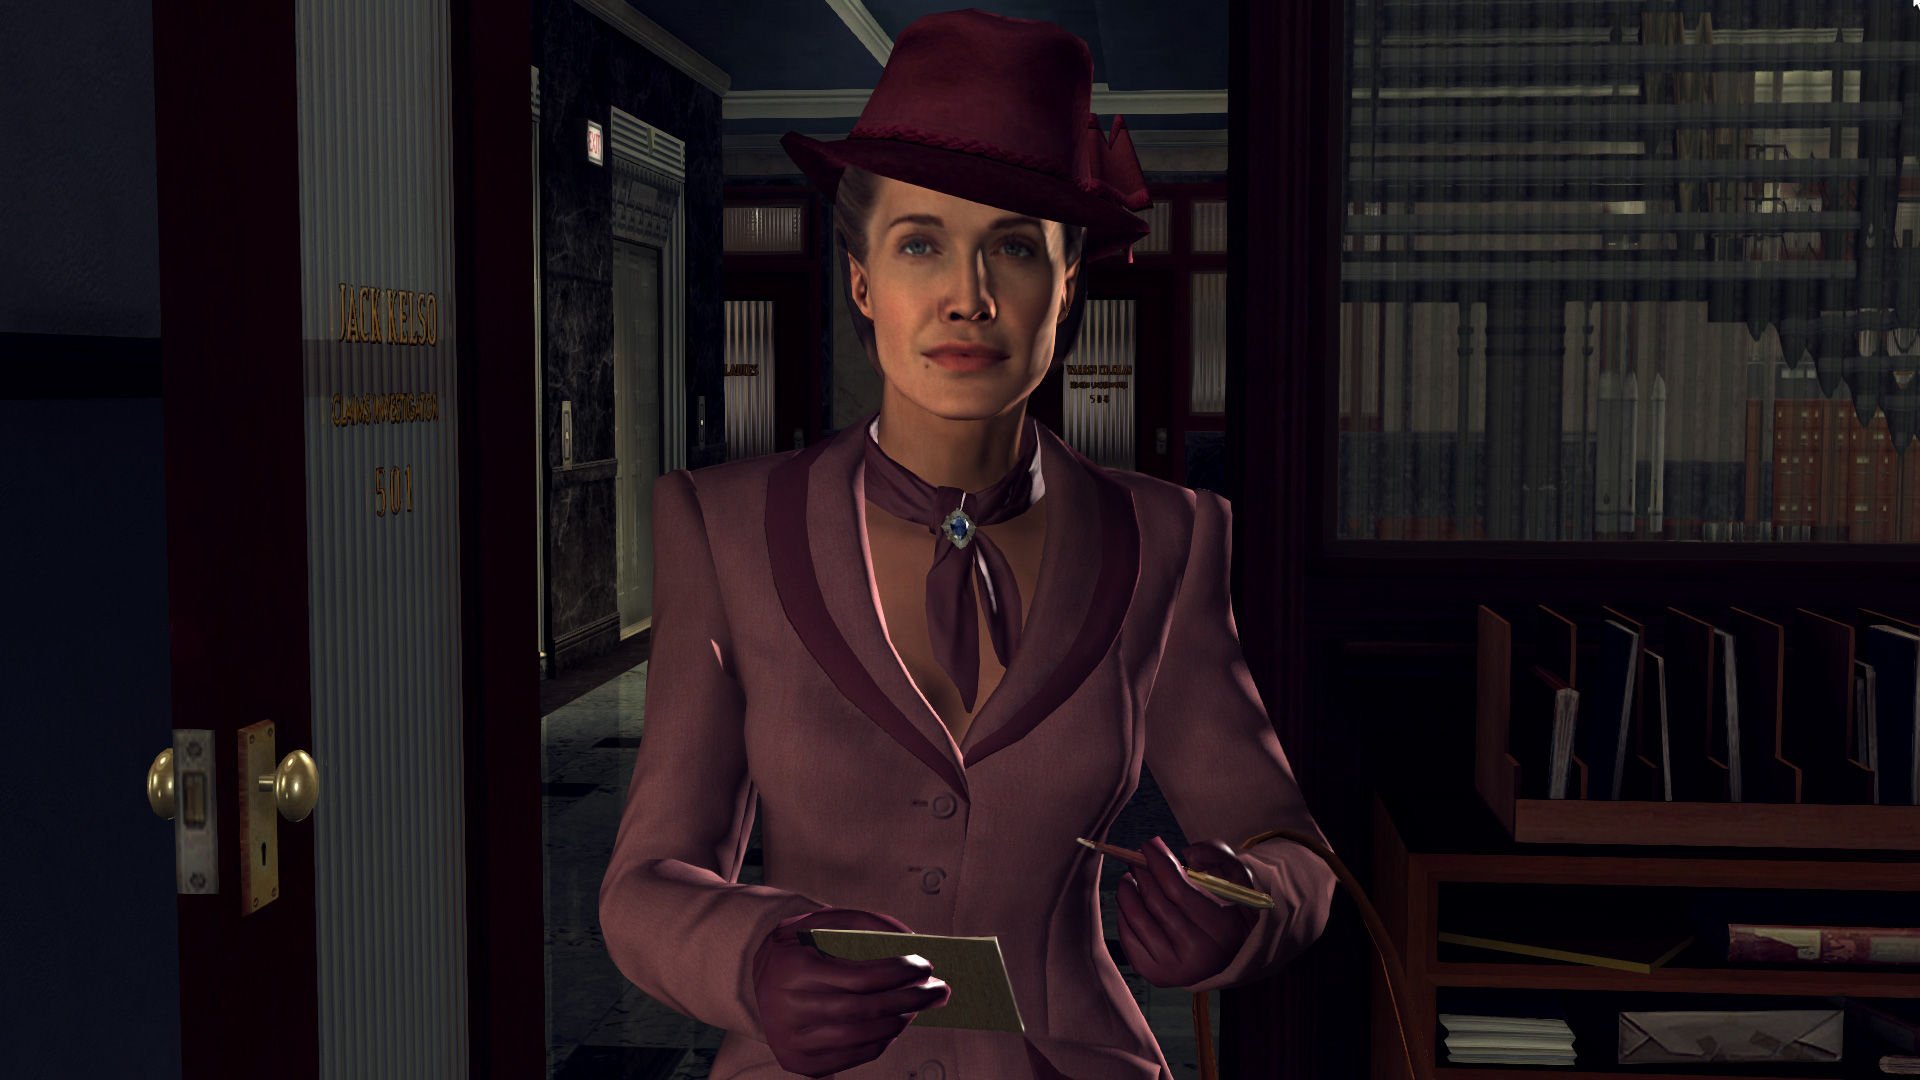 L.A. Noire on Steam